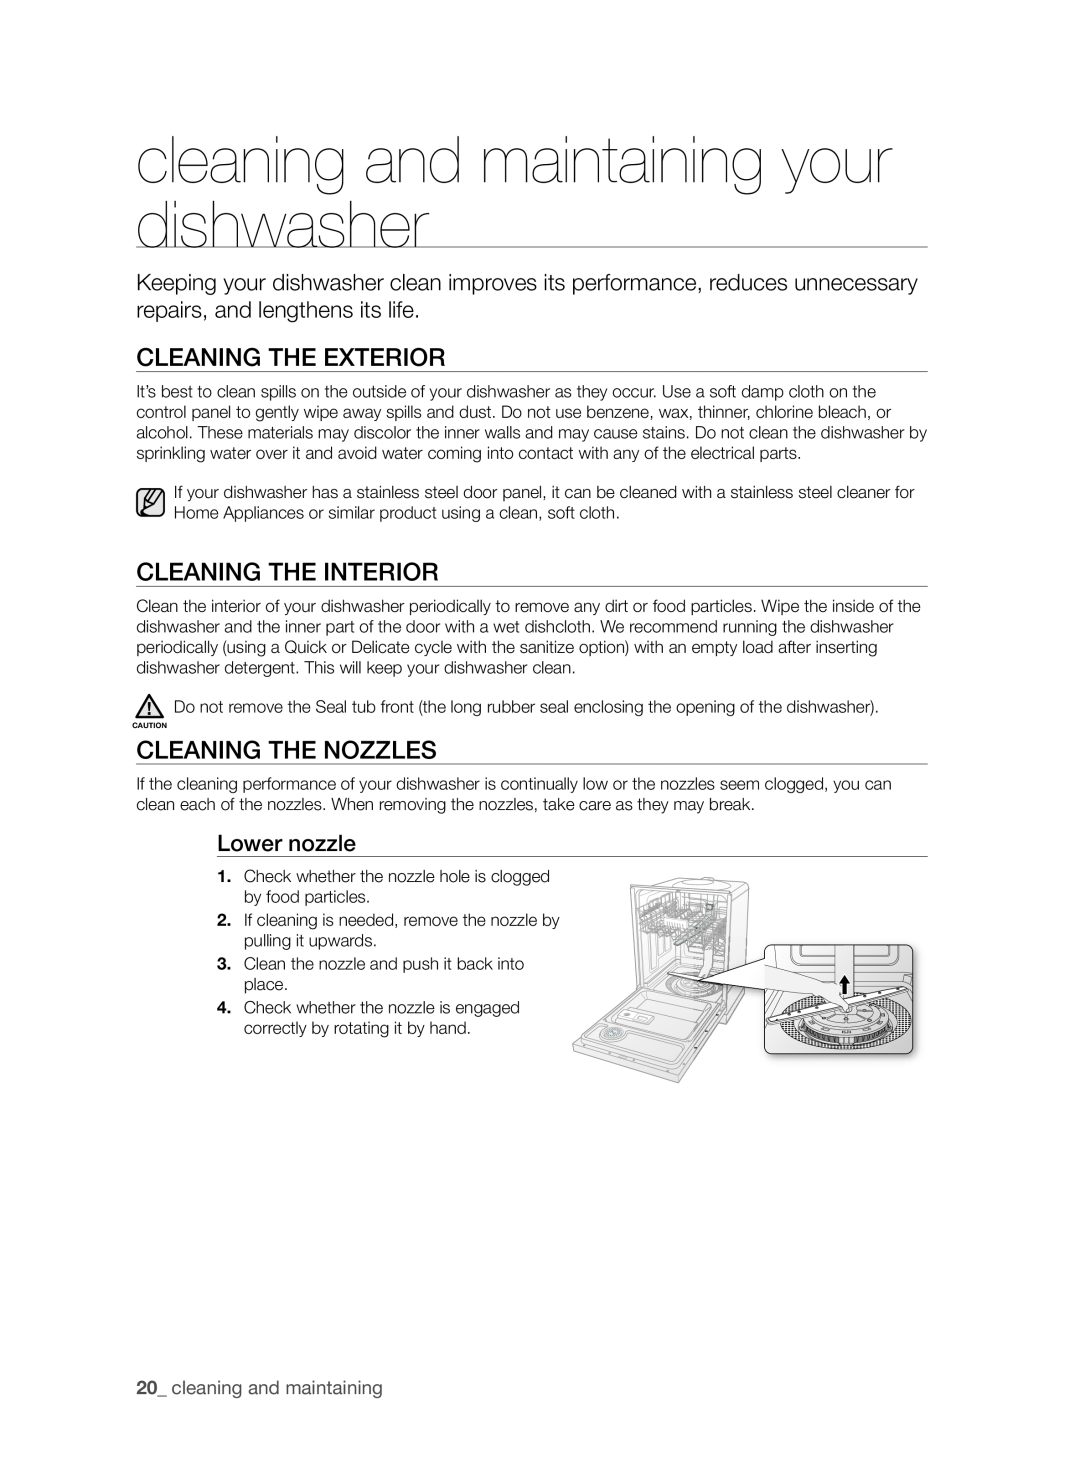 Samsung DMR57LHB cleaning and maintaining your dishwasher, Cleaning the exterior, Cleaning the interior, Lower nozzle 